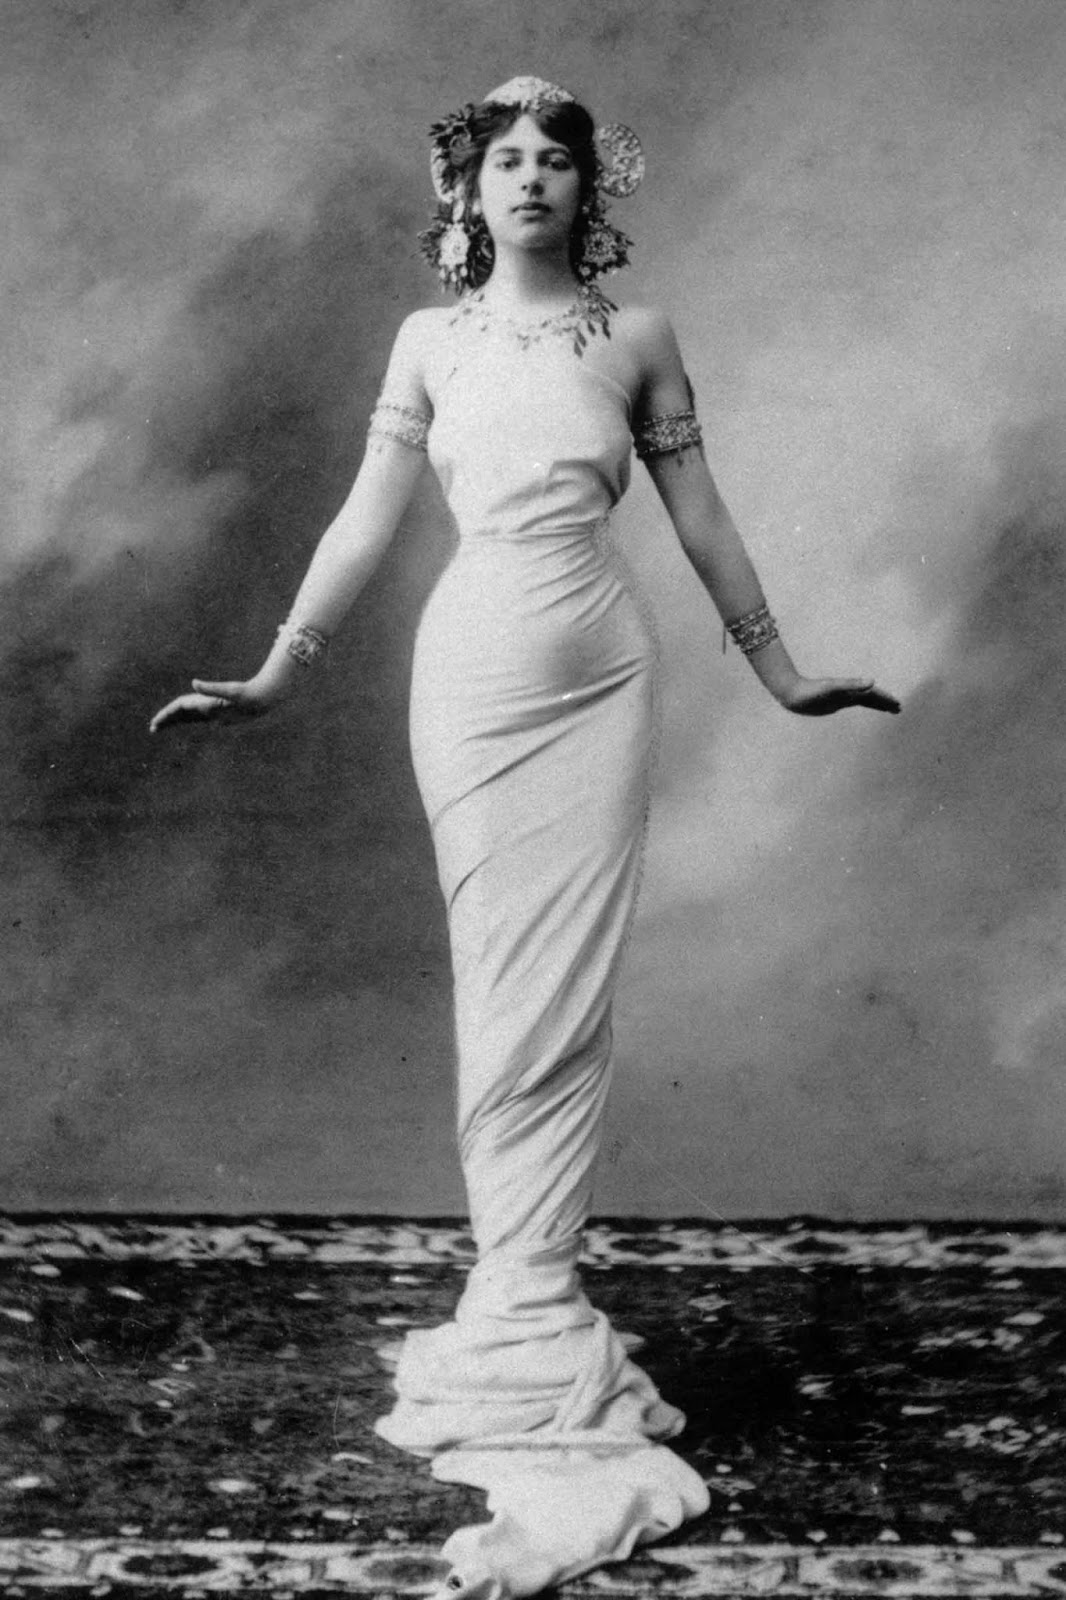 Mata Hari was a Dutch exotic dancer and courtesan who was convicted of being a spy and executed by firing squad in France under charges of espionage for Germany during World War I.